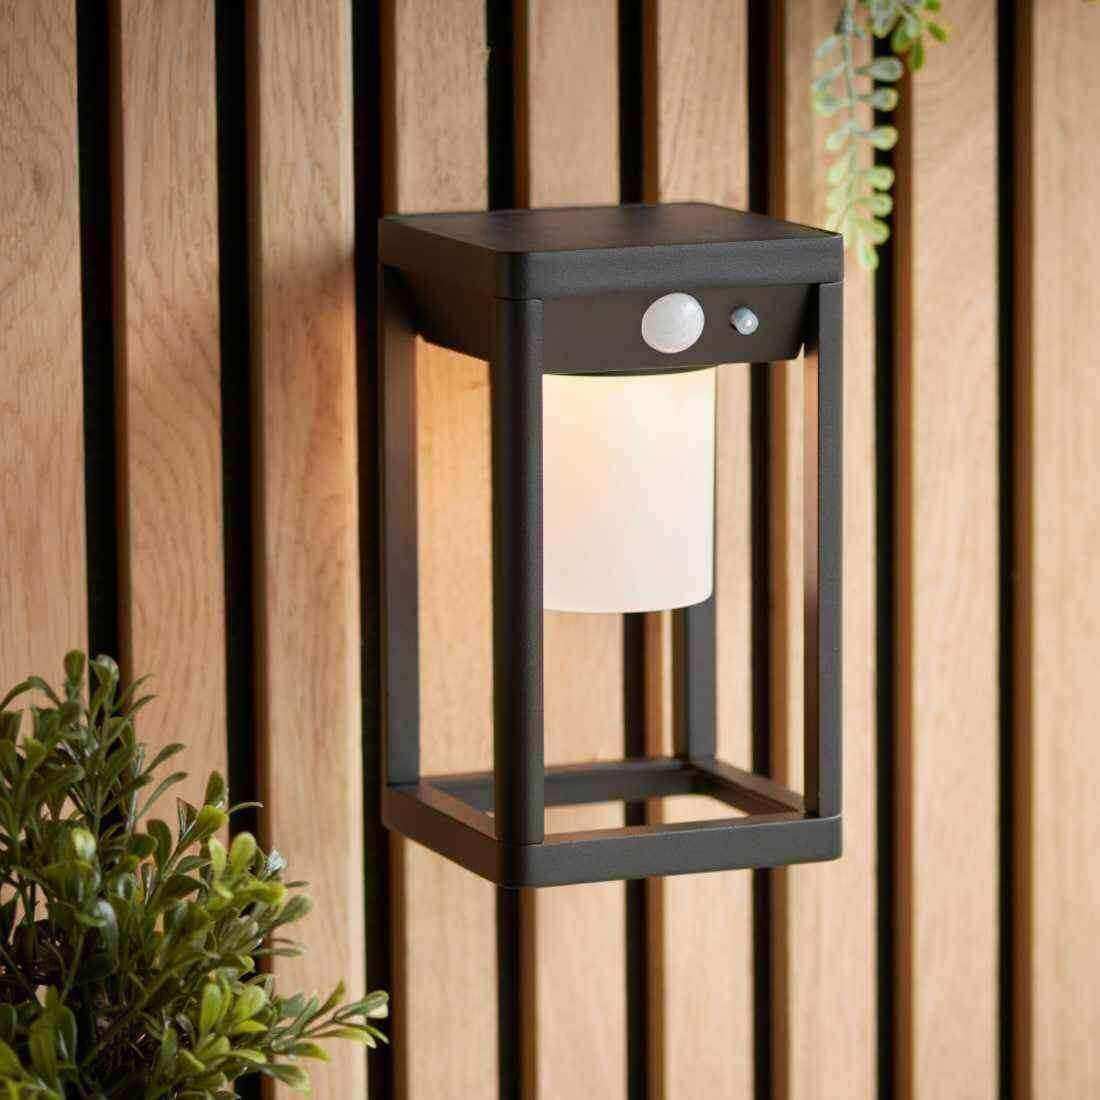 Contemporary Solar-Powered Exterior wall light - The Farthing